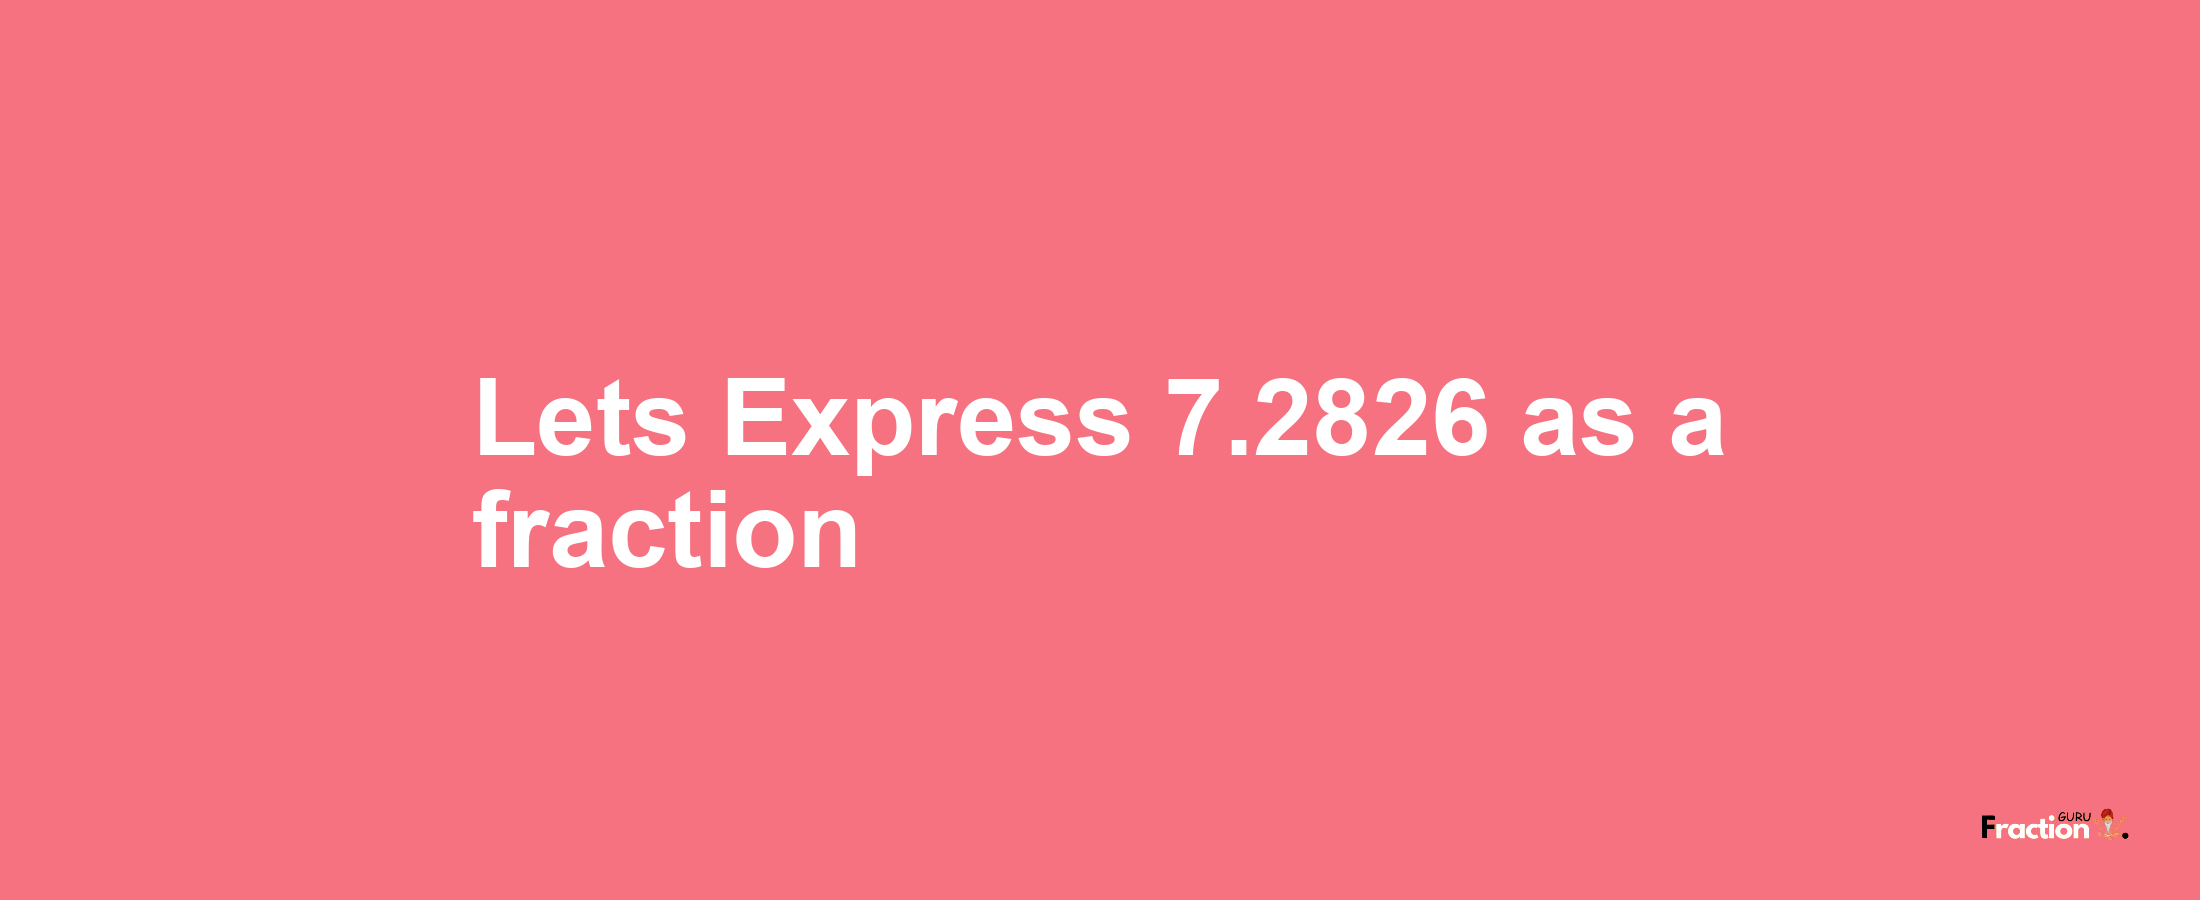 Lets Express 7.2826 as afraction